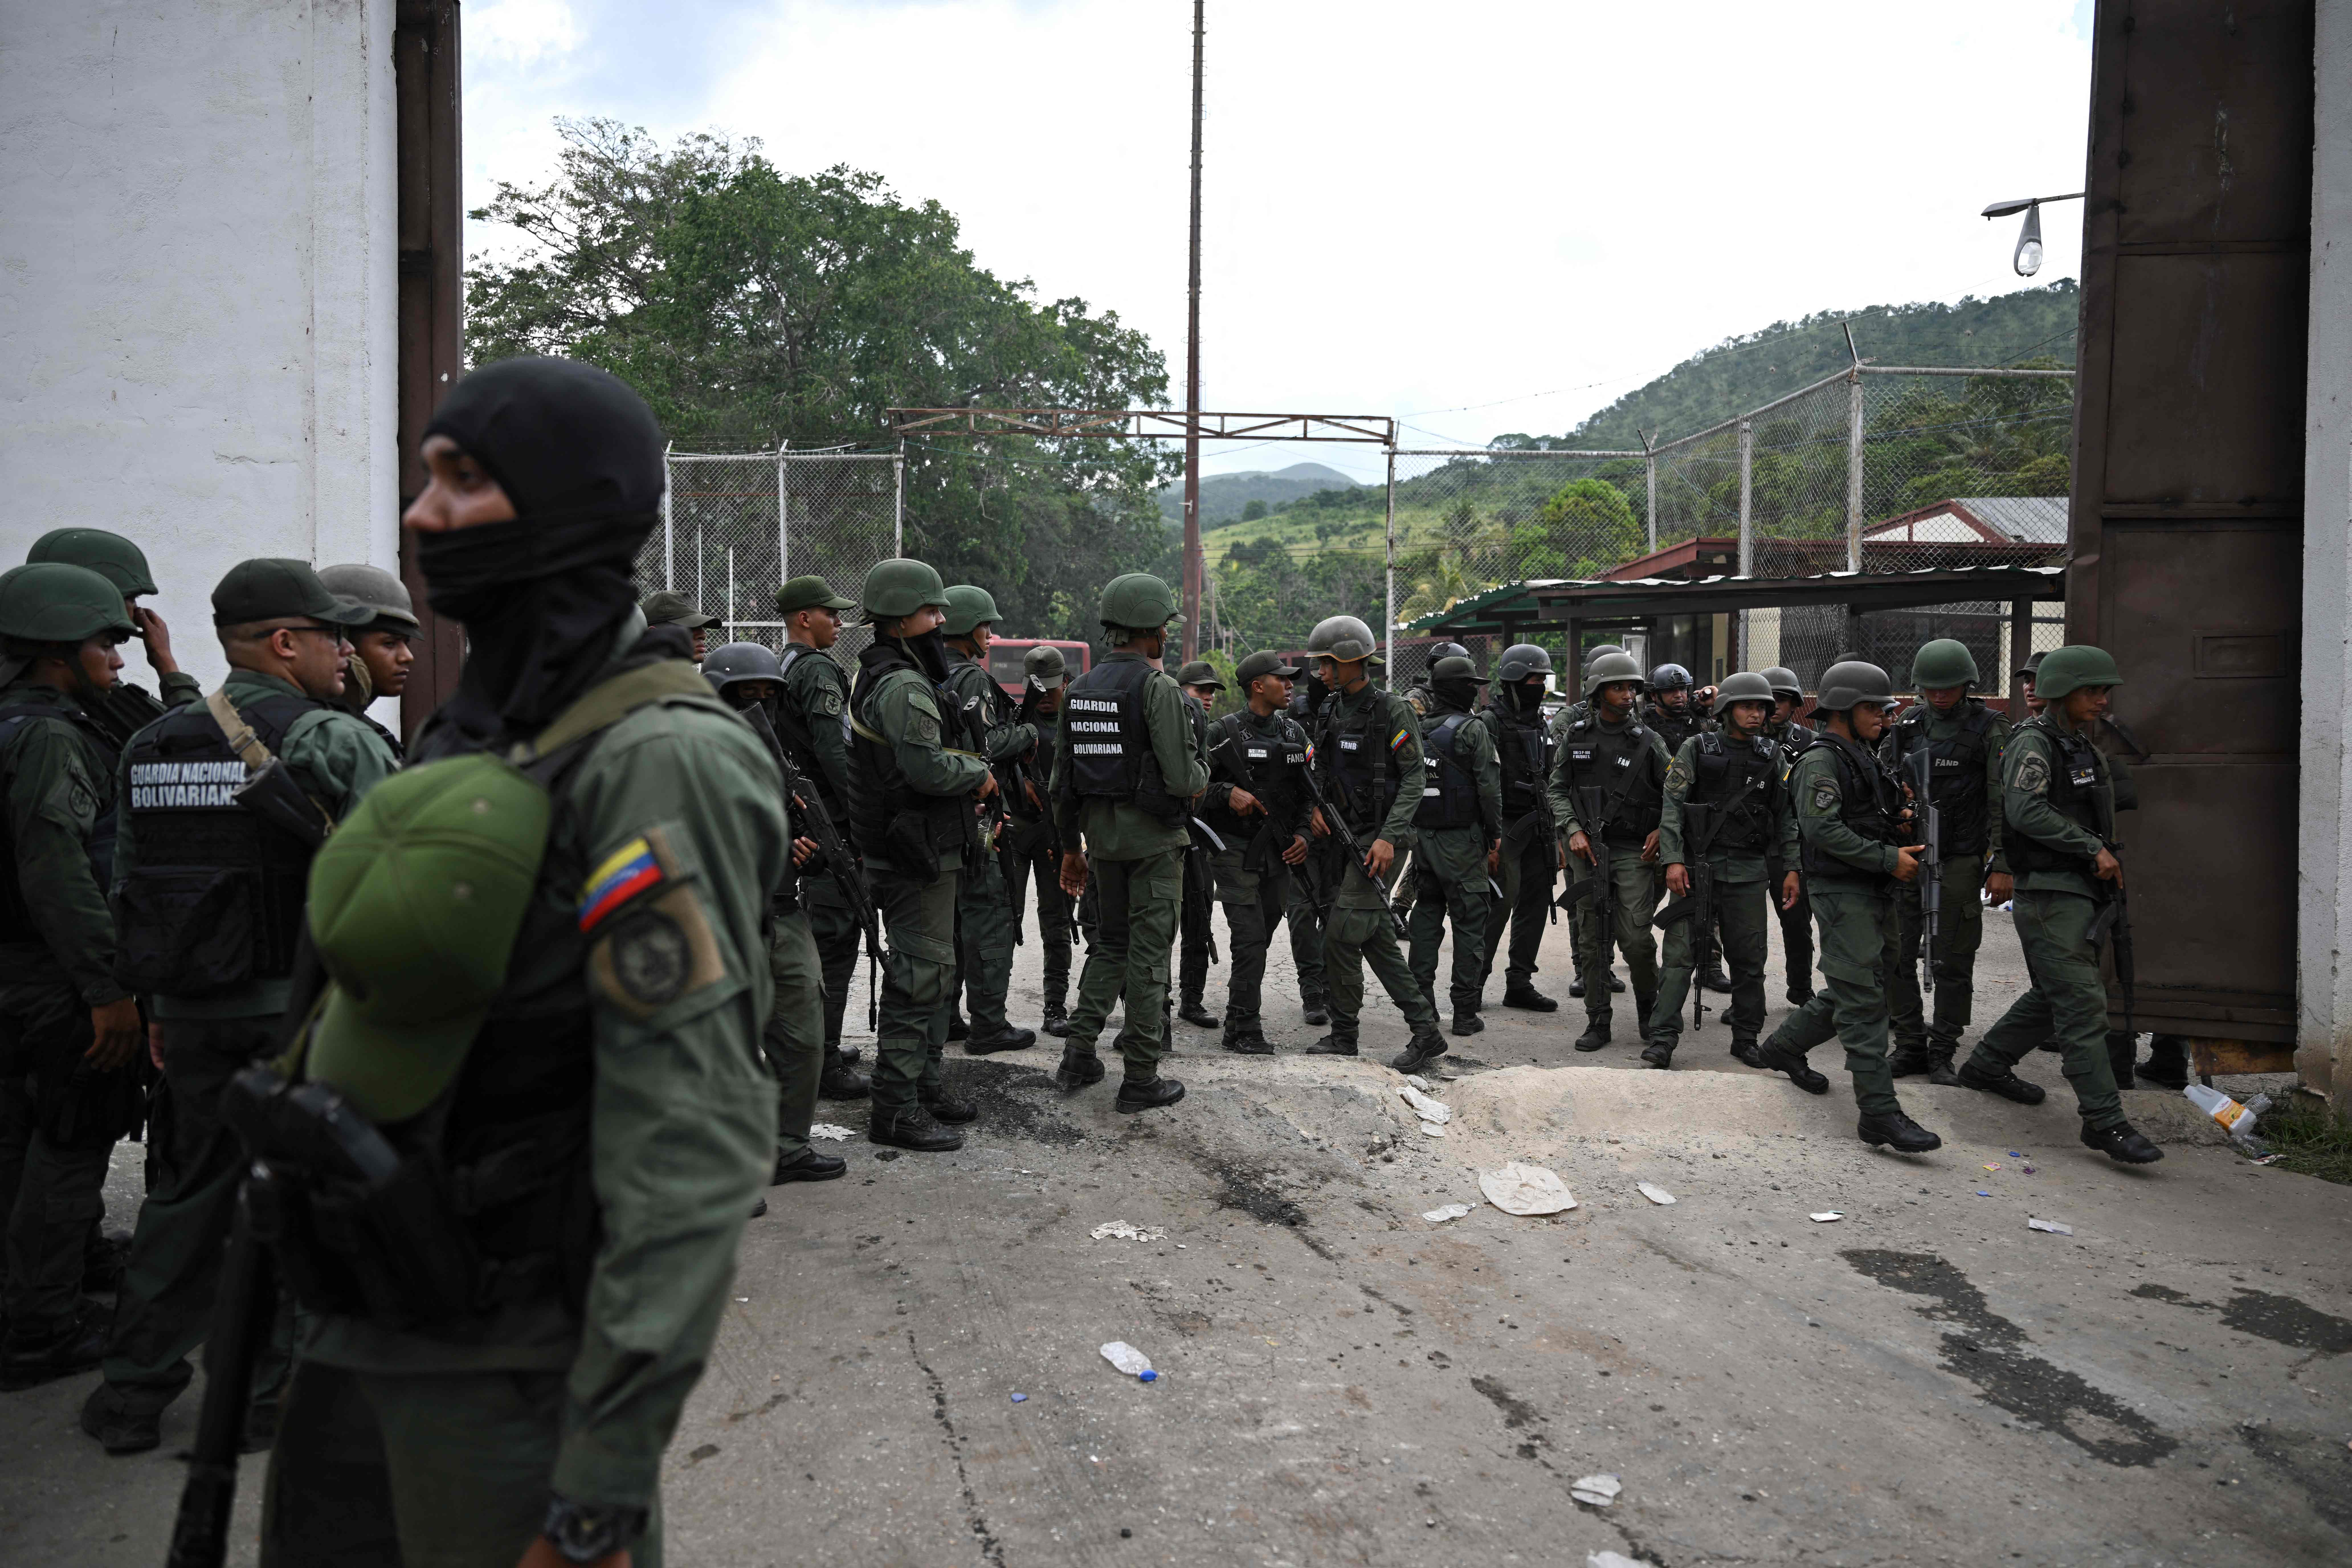 Members of the Bolivarian National Guard stand guard outside Tocoron prison, Venezuela, following a successful plan to fight against "prison mafias".